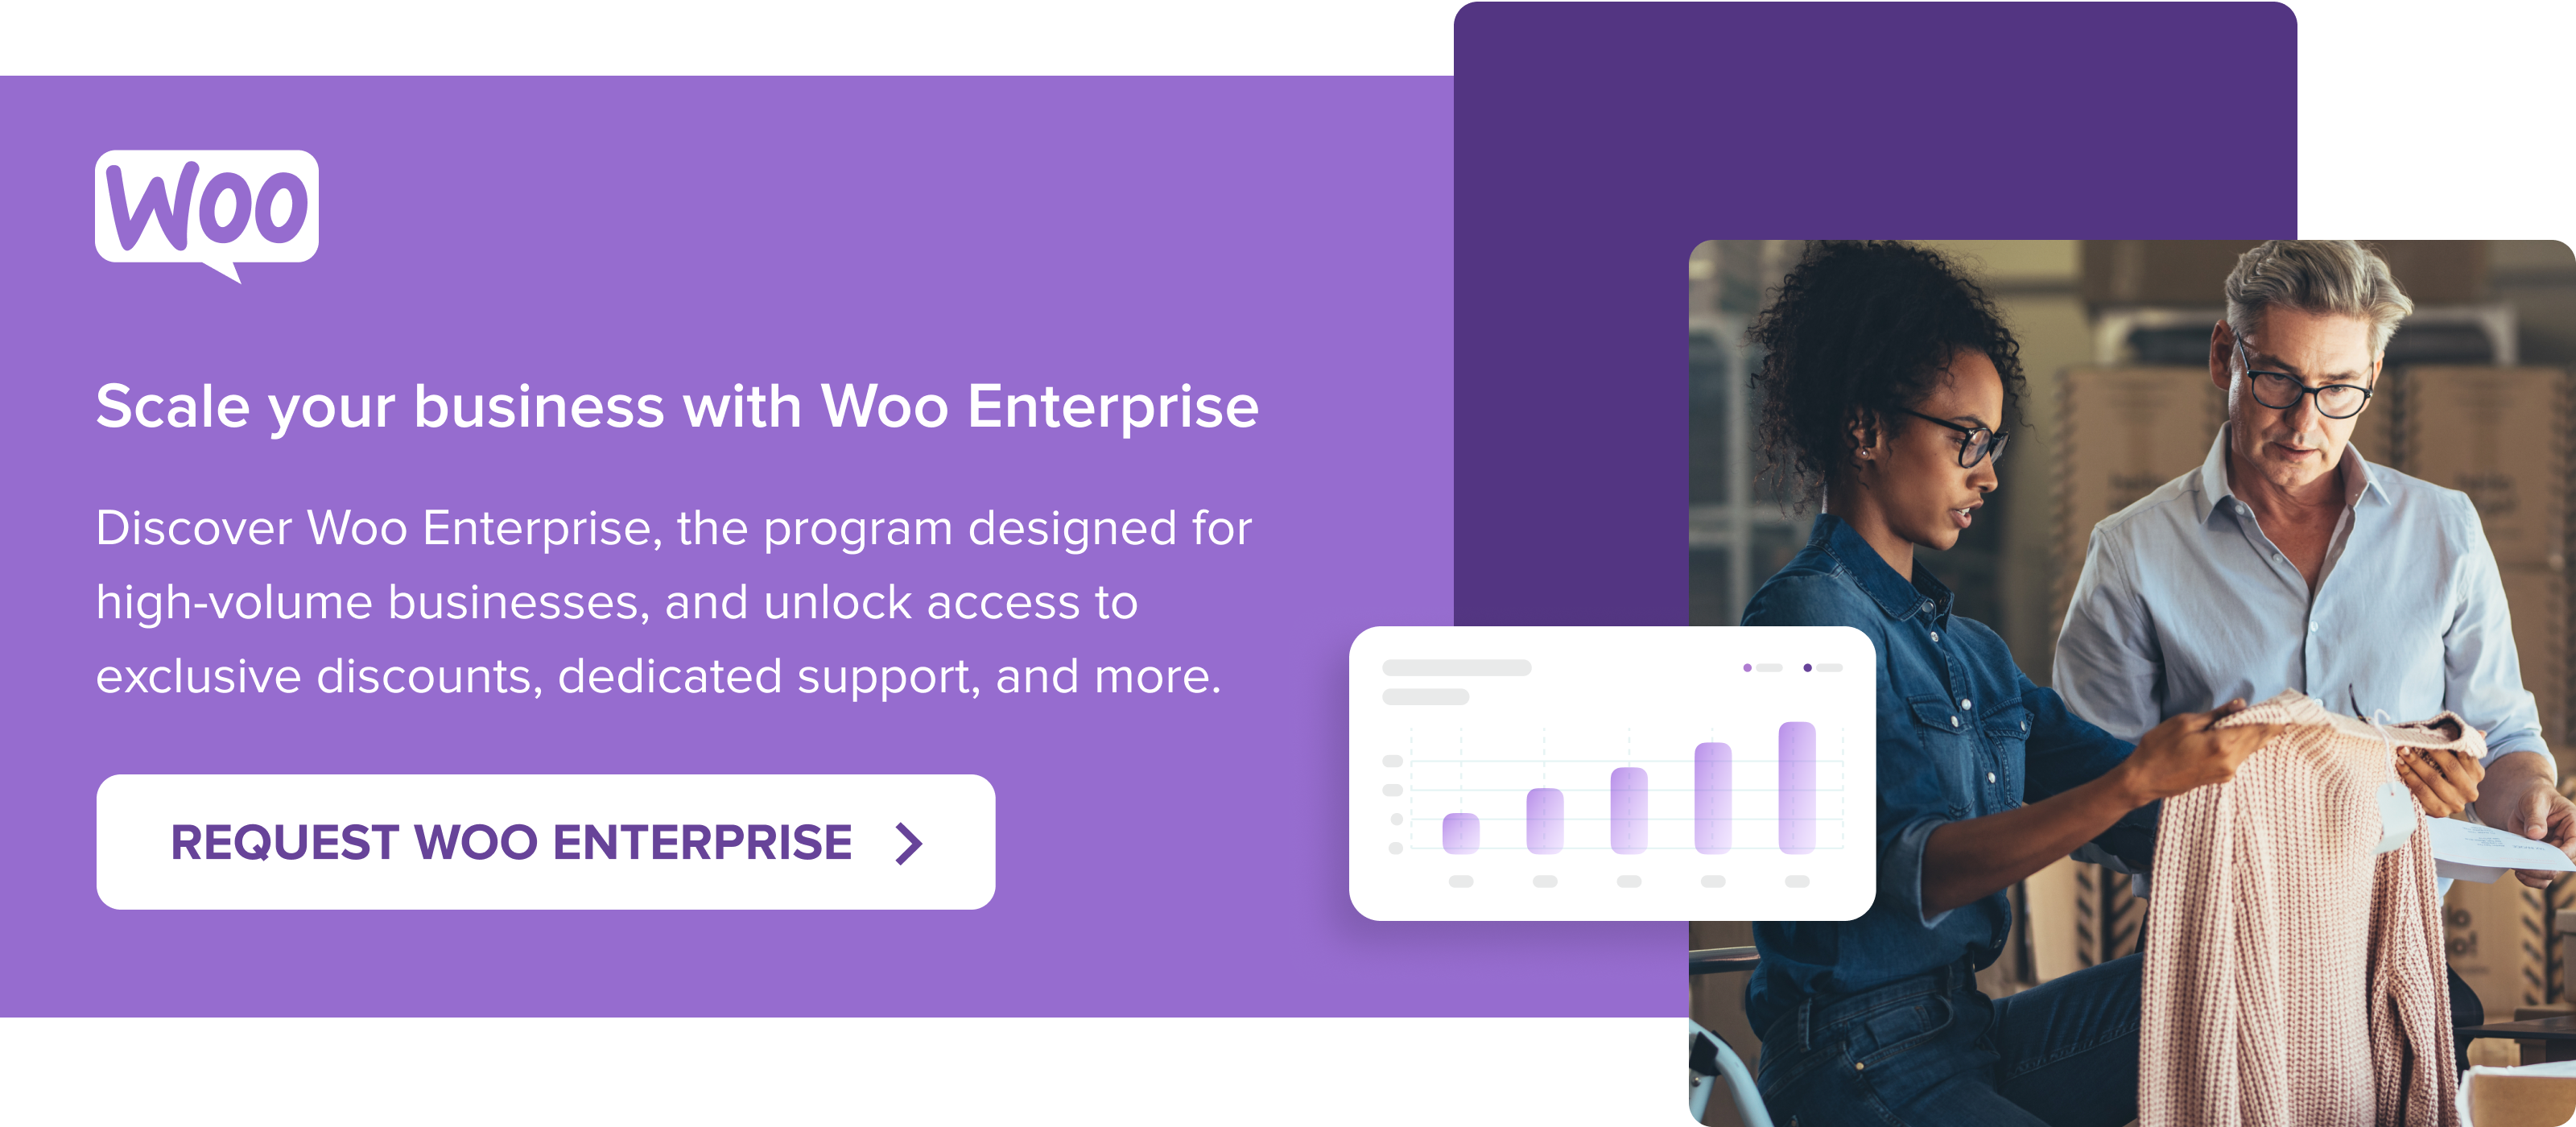 An invitation to request a Woo Enterprise account